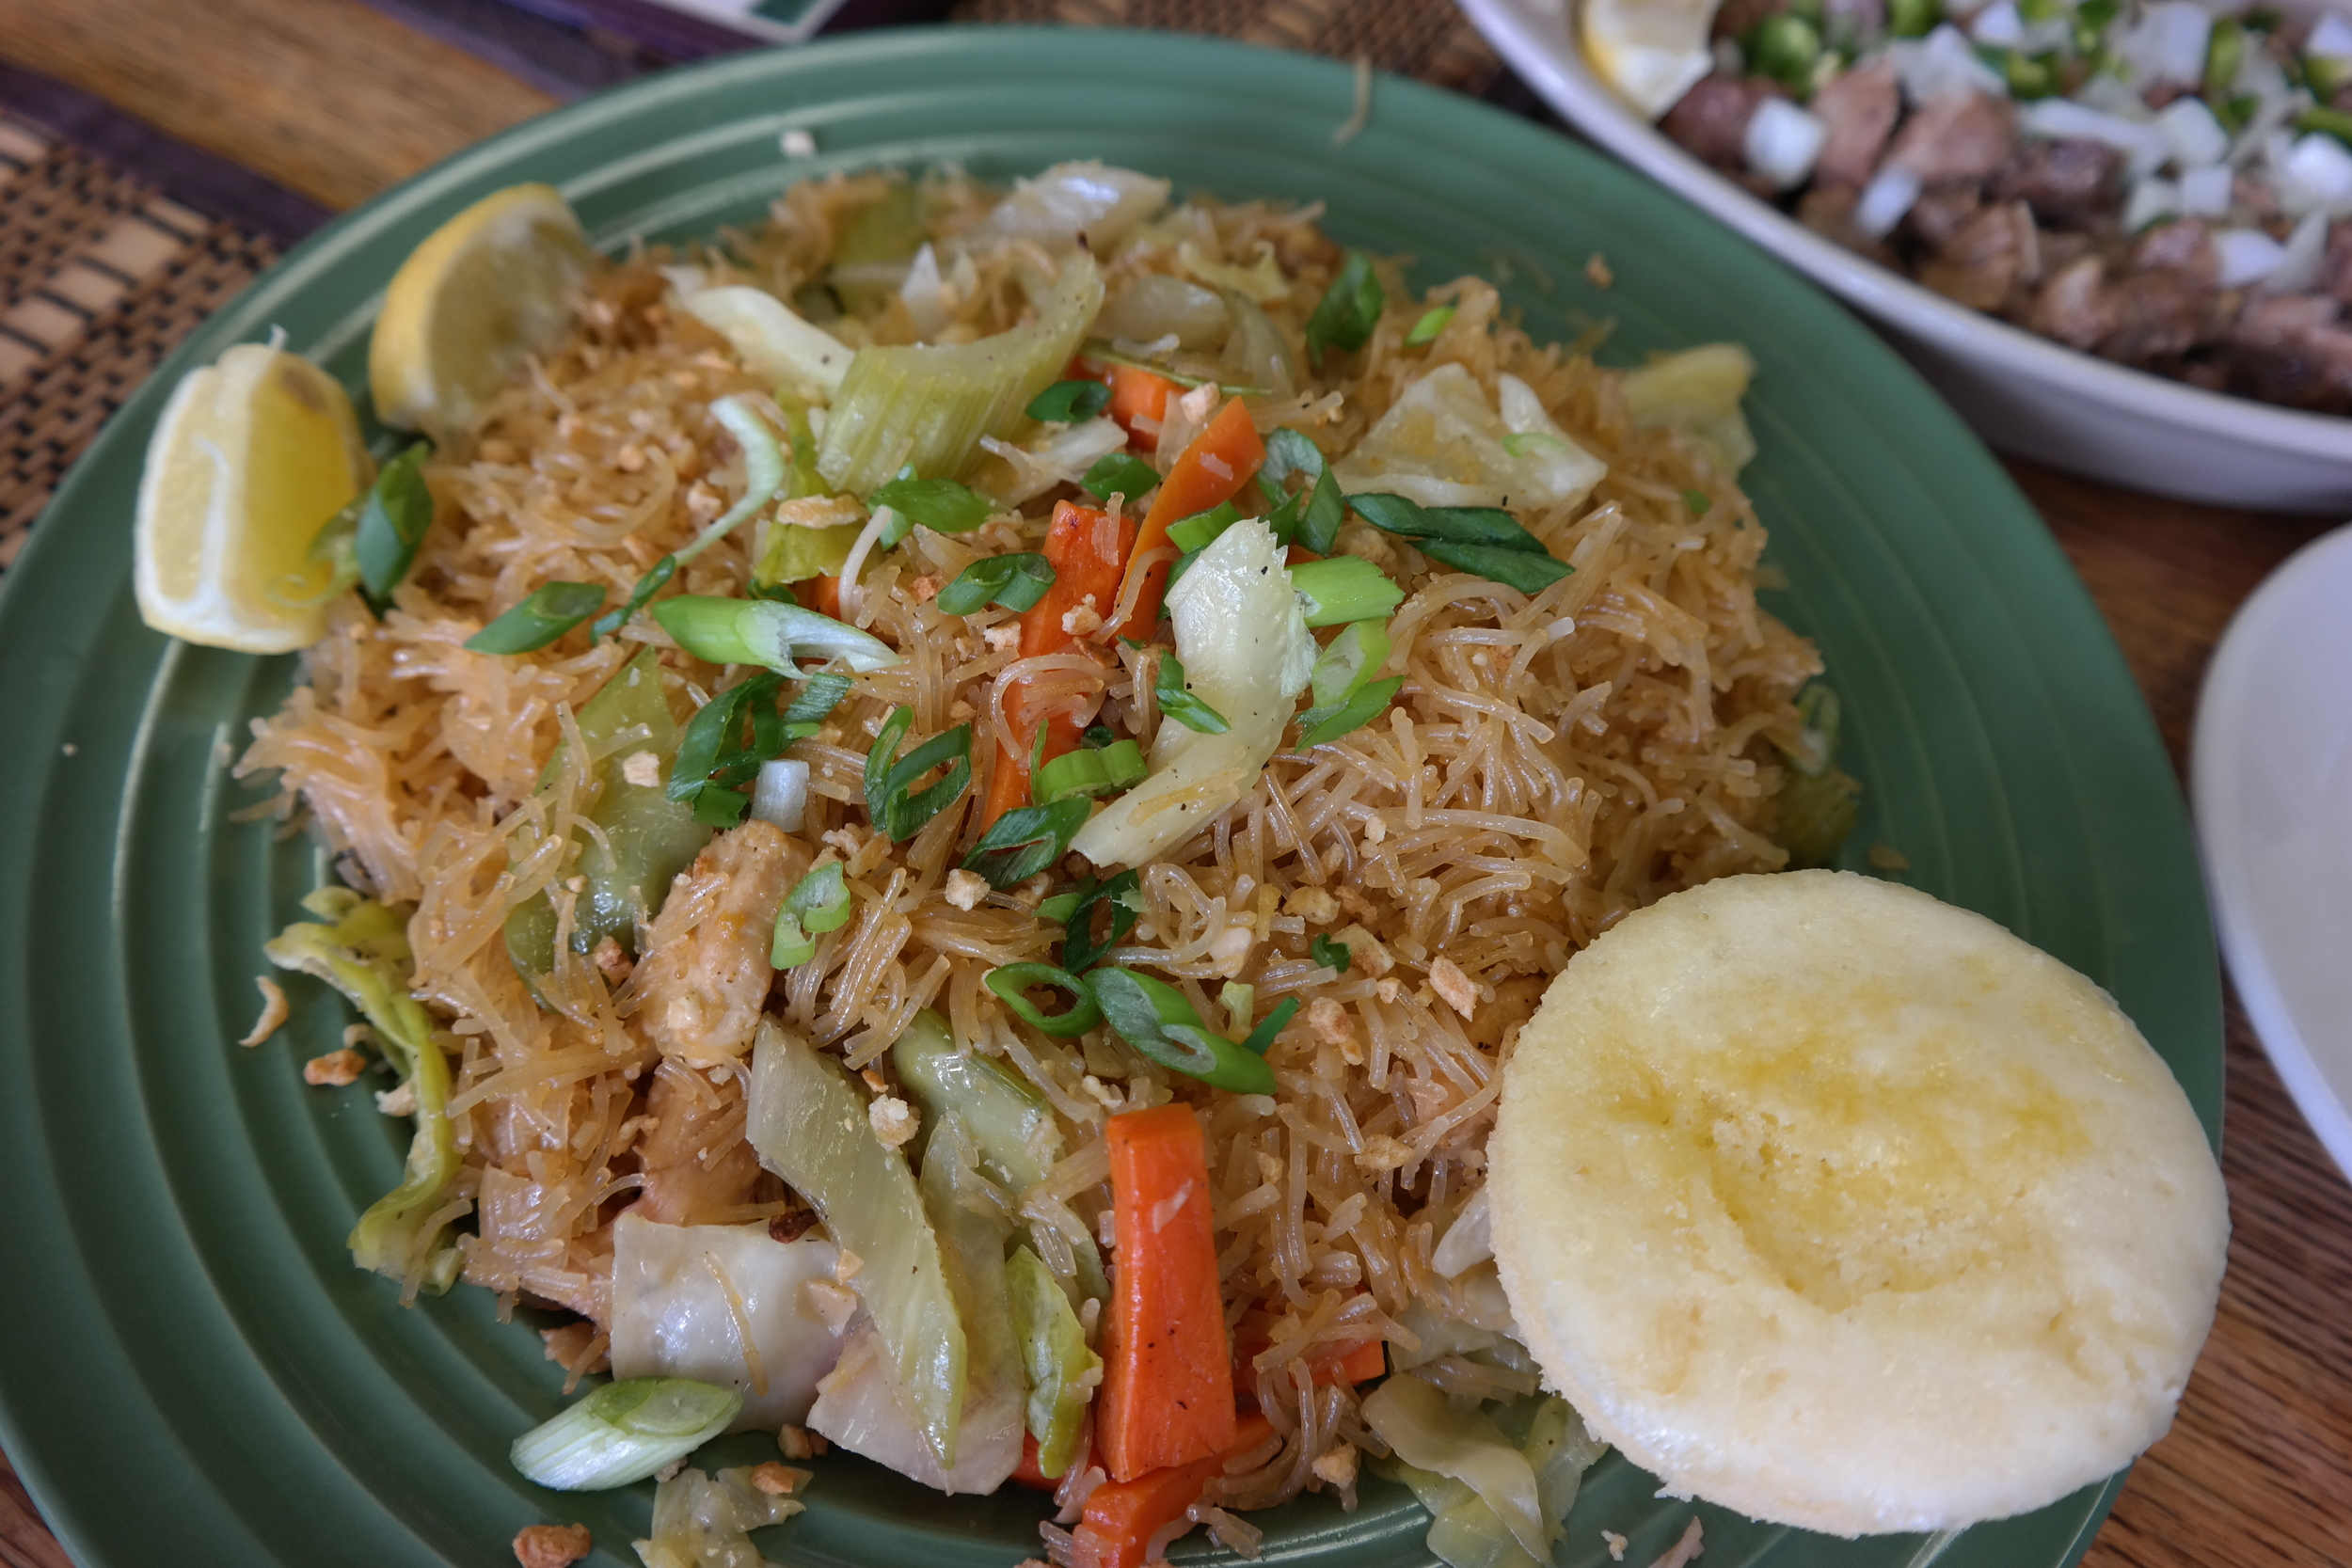 Pancit, rice noodles with vegetables and chicken and served with puto (steamed rice cake)